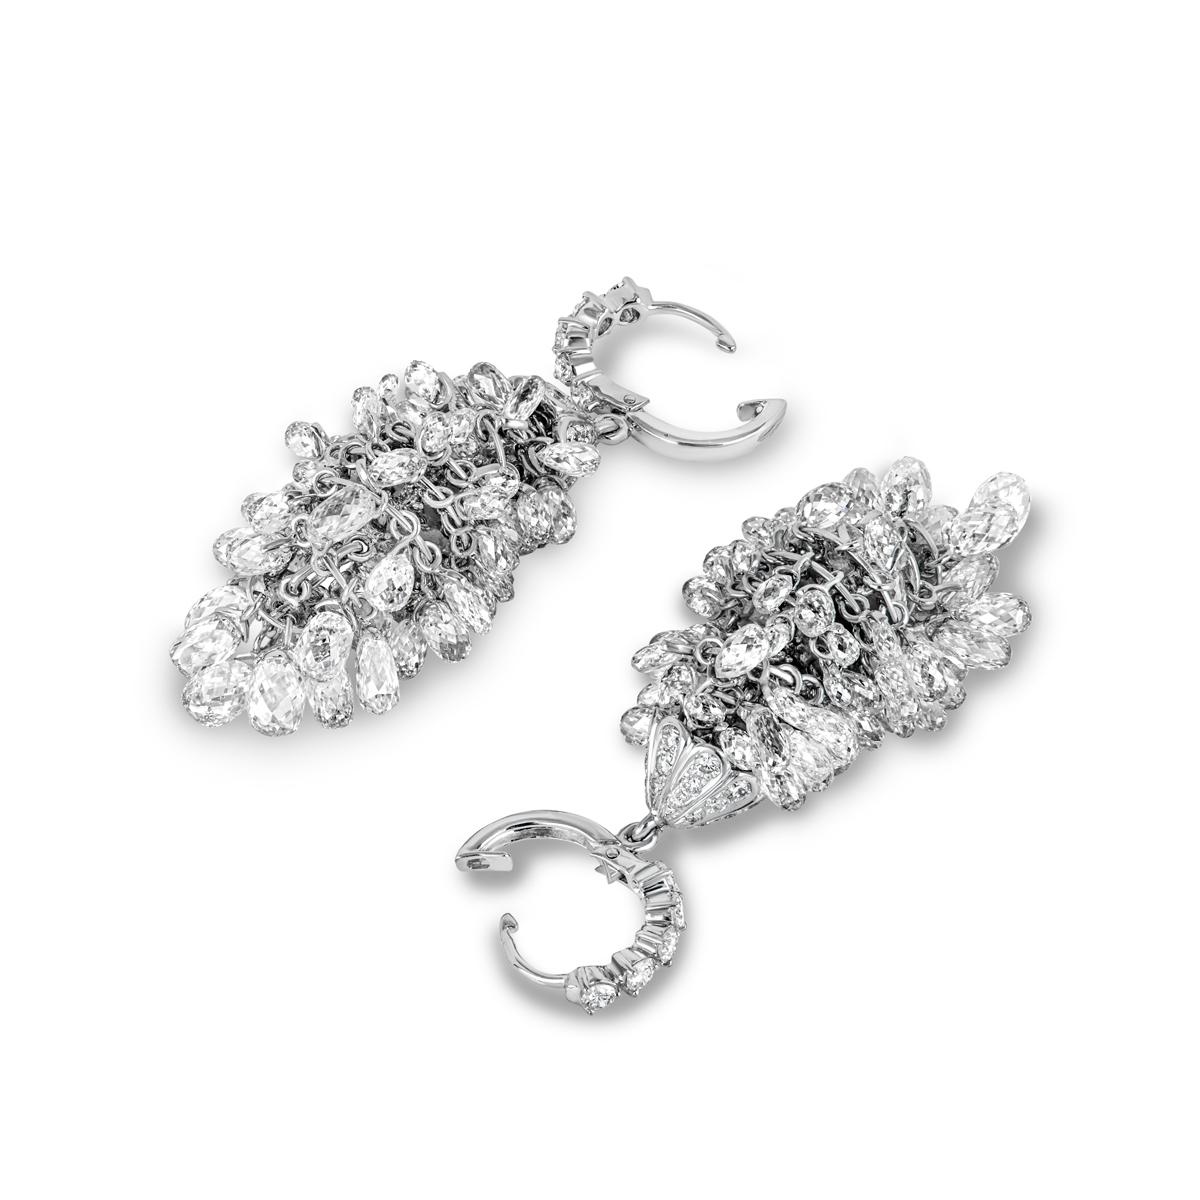 A fabulous pair of white gold diamond chandelier earrings. The earrings consist of a small hoop and connector each set with round brilliant cut diamonds, suspending an 8 tiered pattern of freely moving briolette cut diamonds. The round brilliant cut